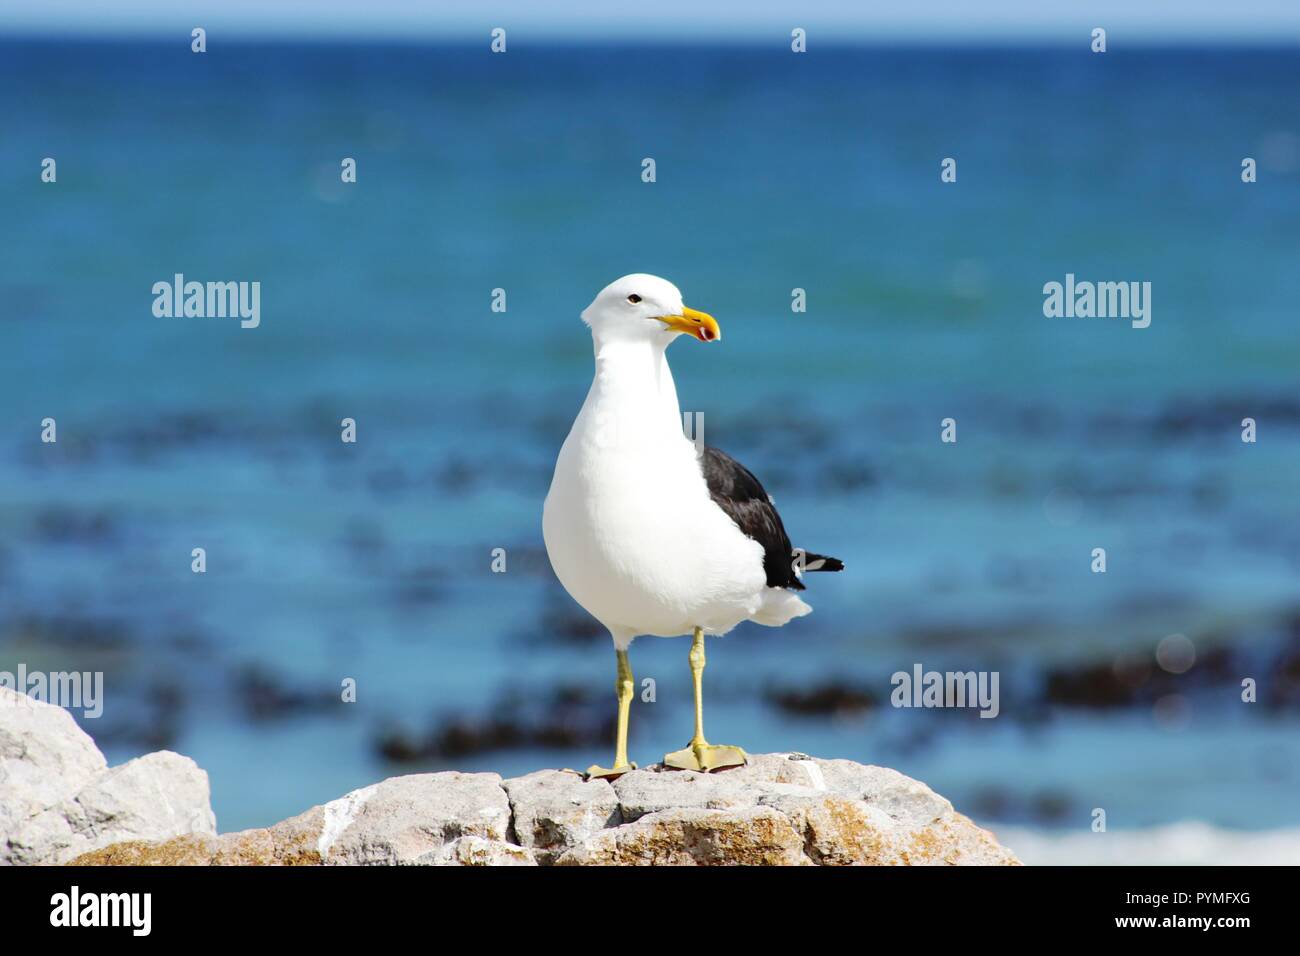 Kelp Gull (Larus dominicanus) sitting on a rock with the blue ocean in the background looking at the camera close up. Stock Photo